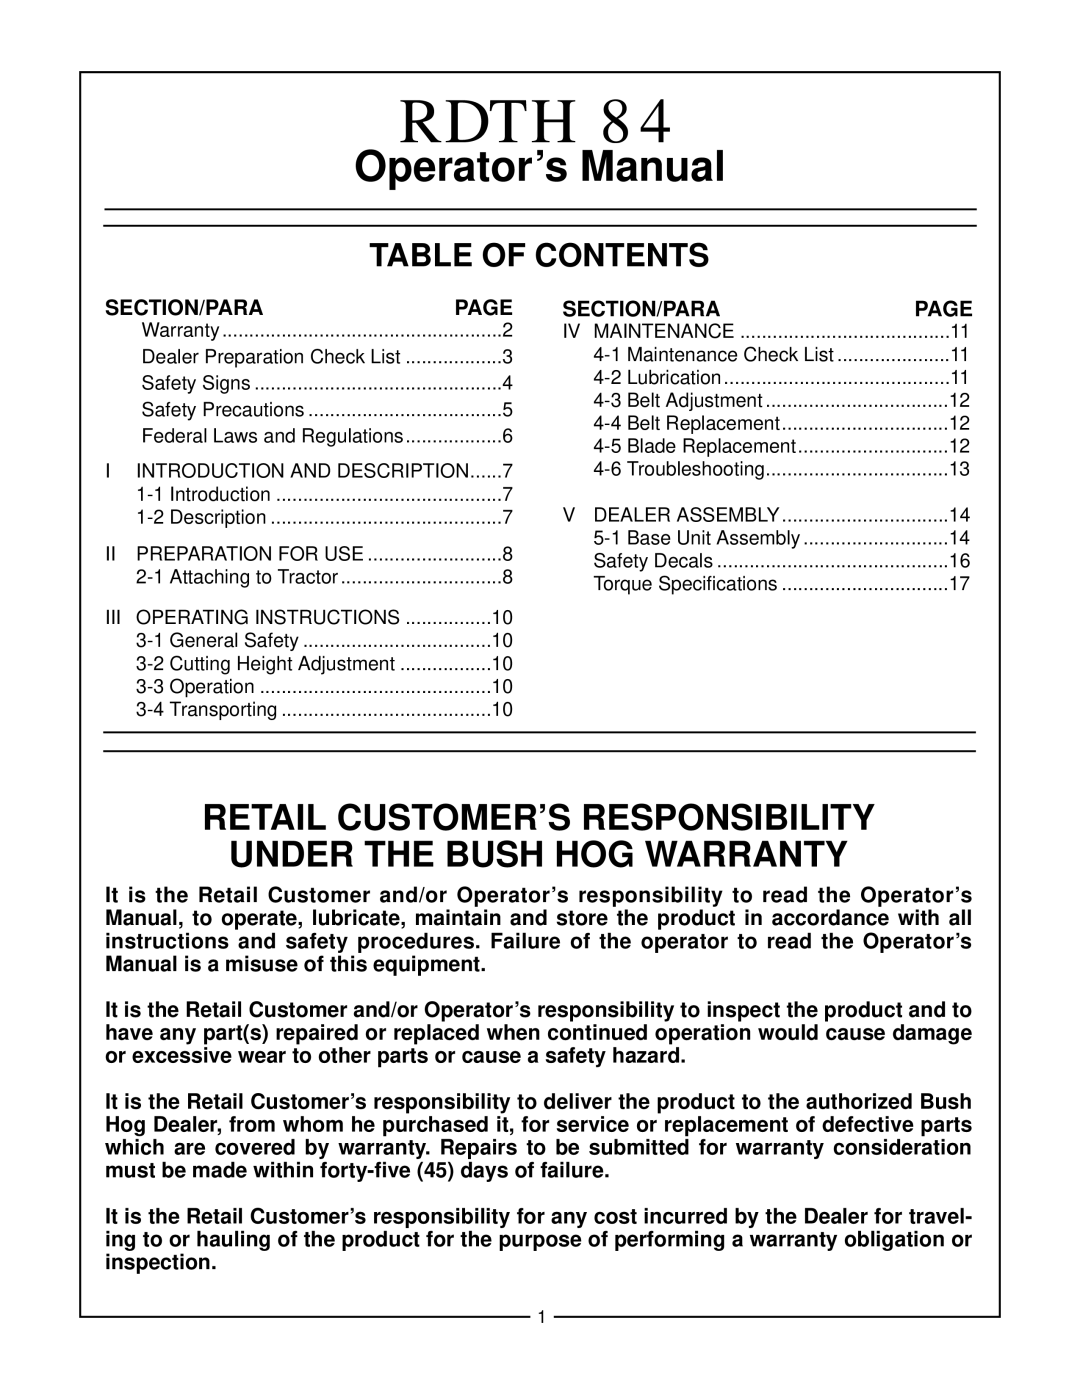 Bush Hog RDTH 84 manual Table Of Contents, Section/Para, Page, Rdth, Operator’s Manual, Retail Customer’S Responsibility 